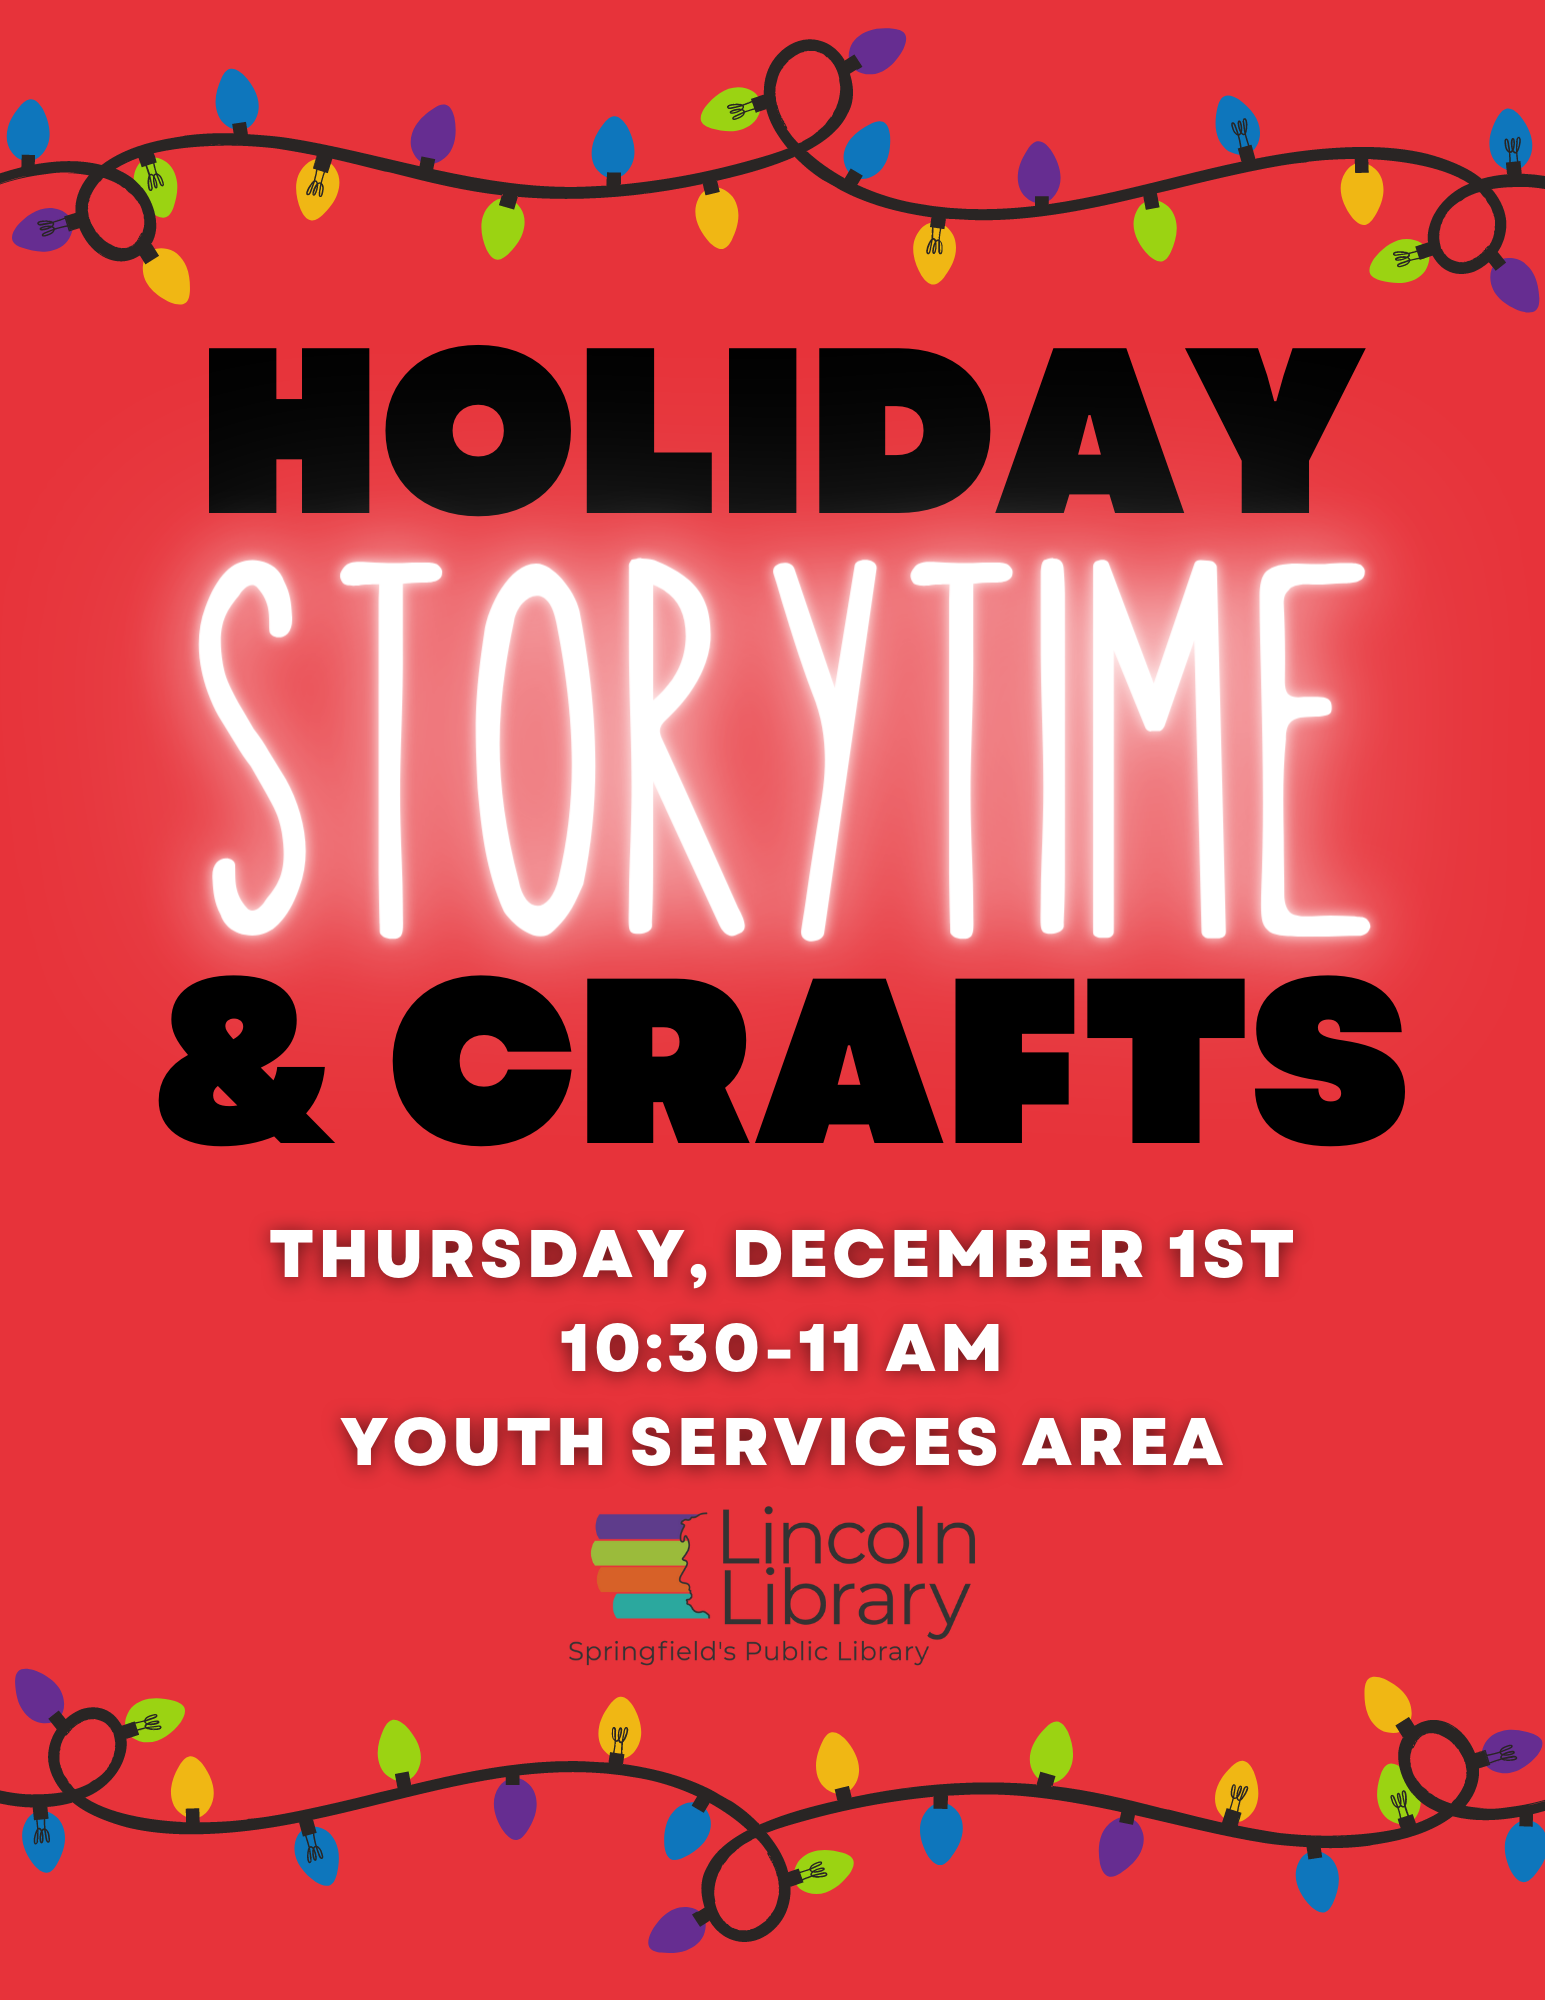 string lights on a bright red background with the text "Holiday Storytime & Crafts"